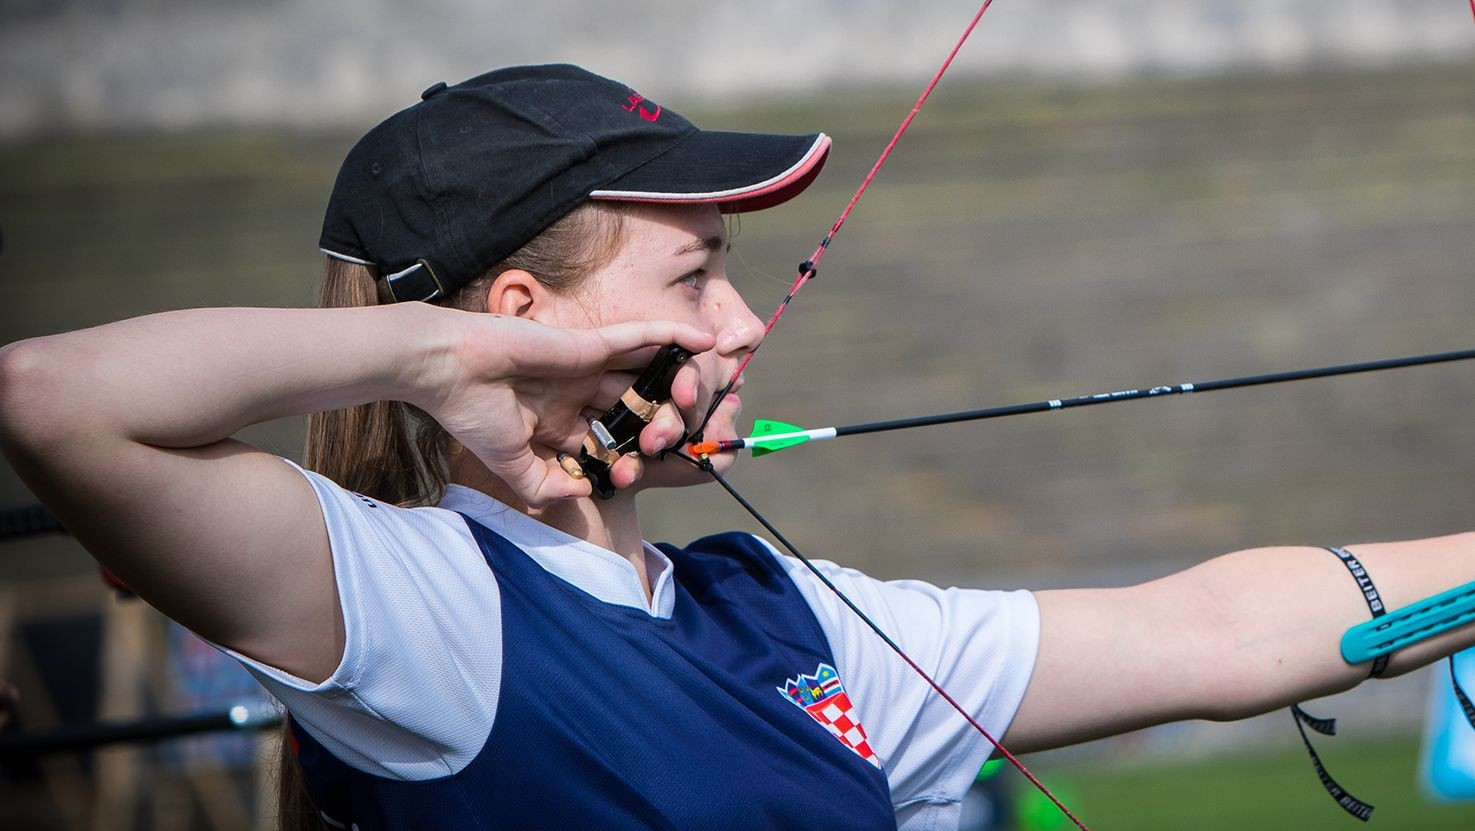 Mlinaric continues impressive Archery World Cup debut in Berlin